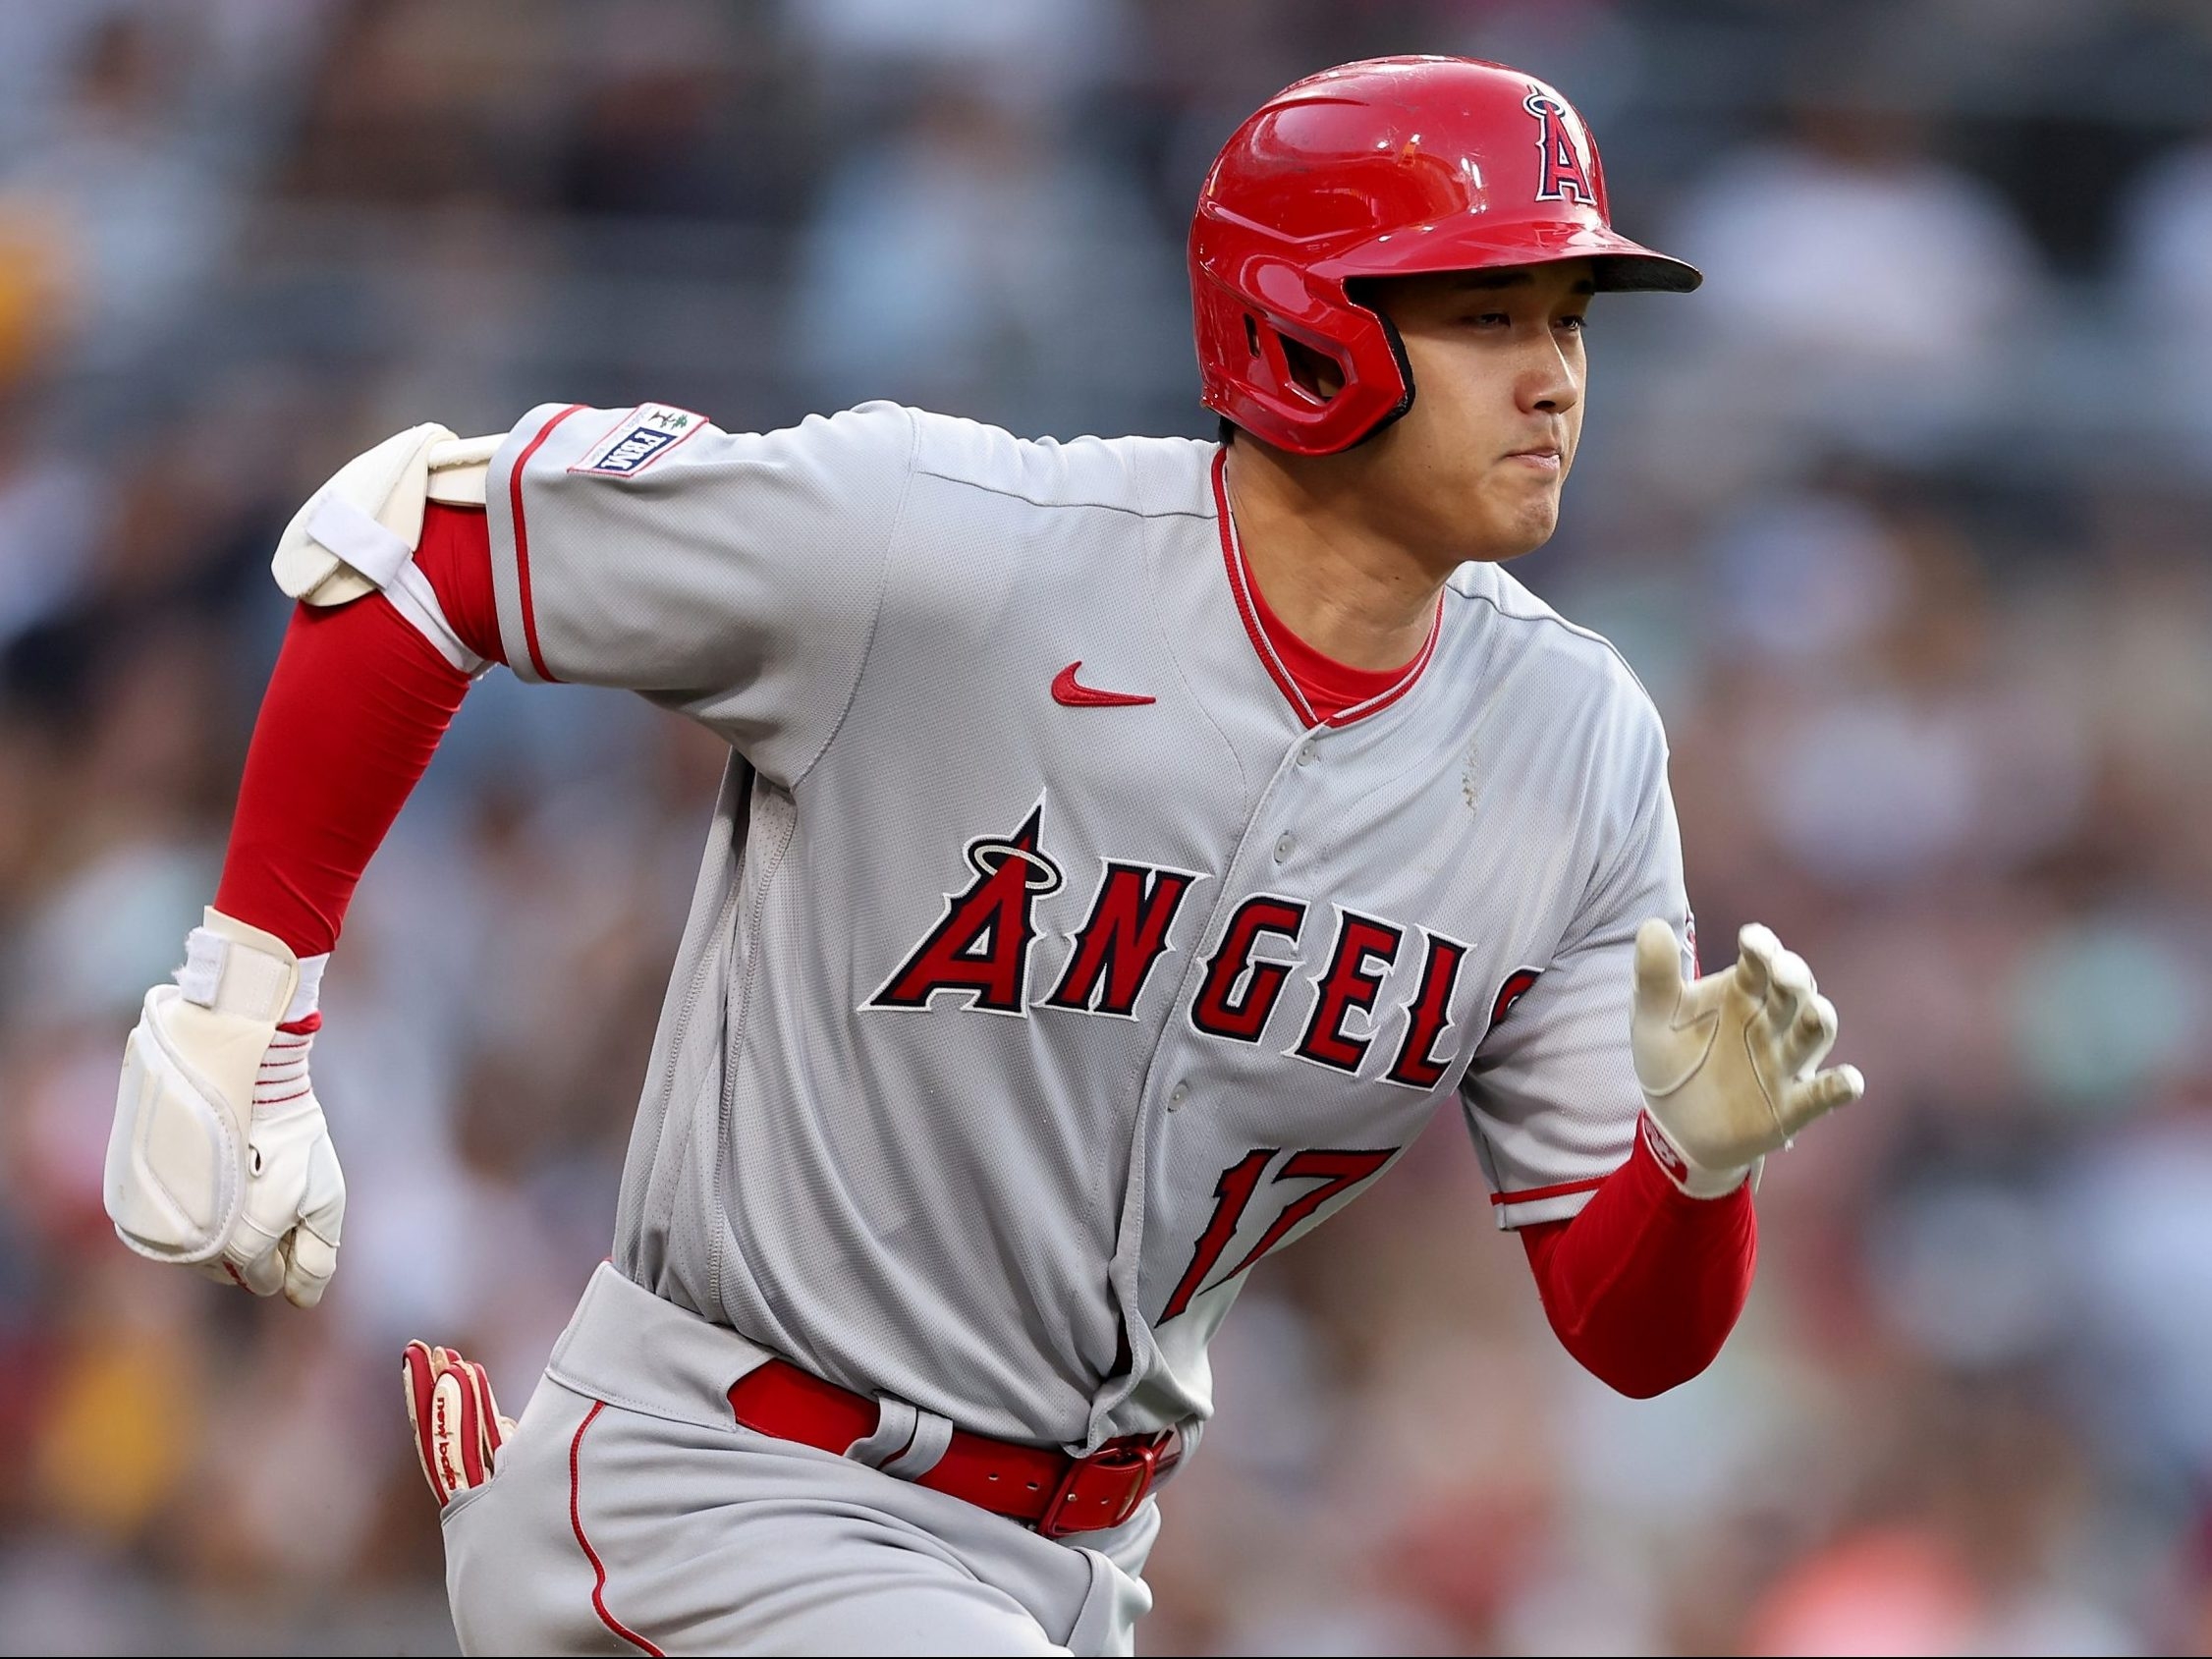 Shohei Ohtani and Ronald Acuña Jr elected to start in MLB All-Star Game